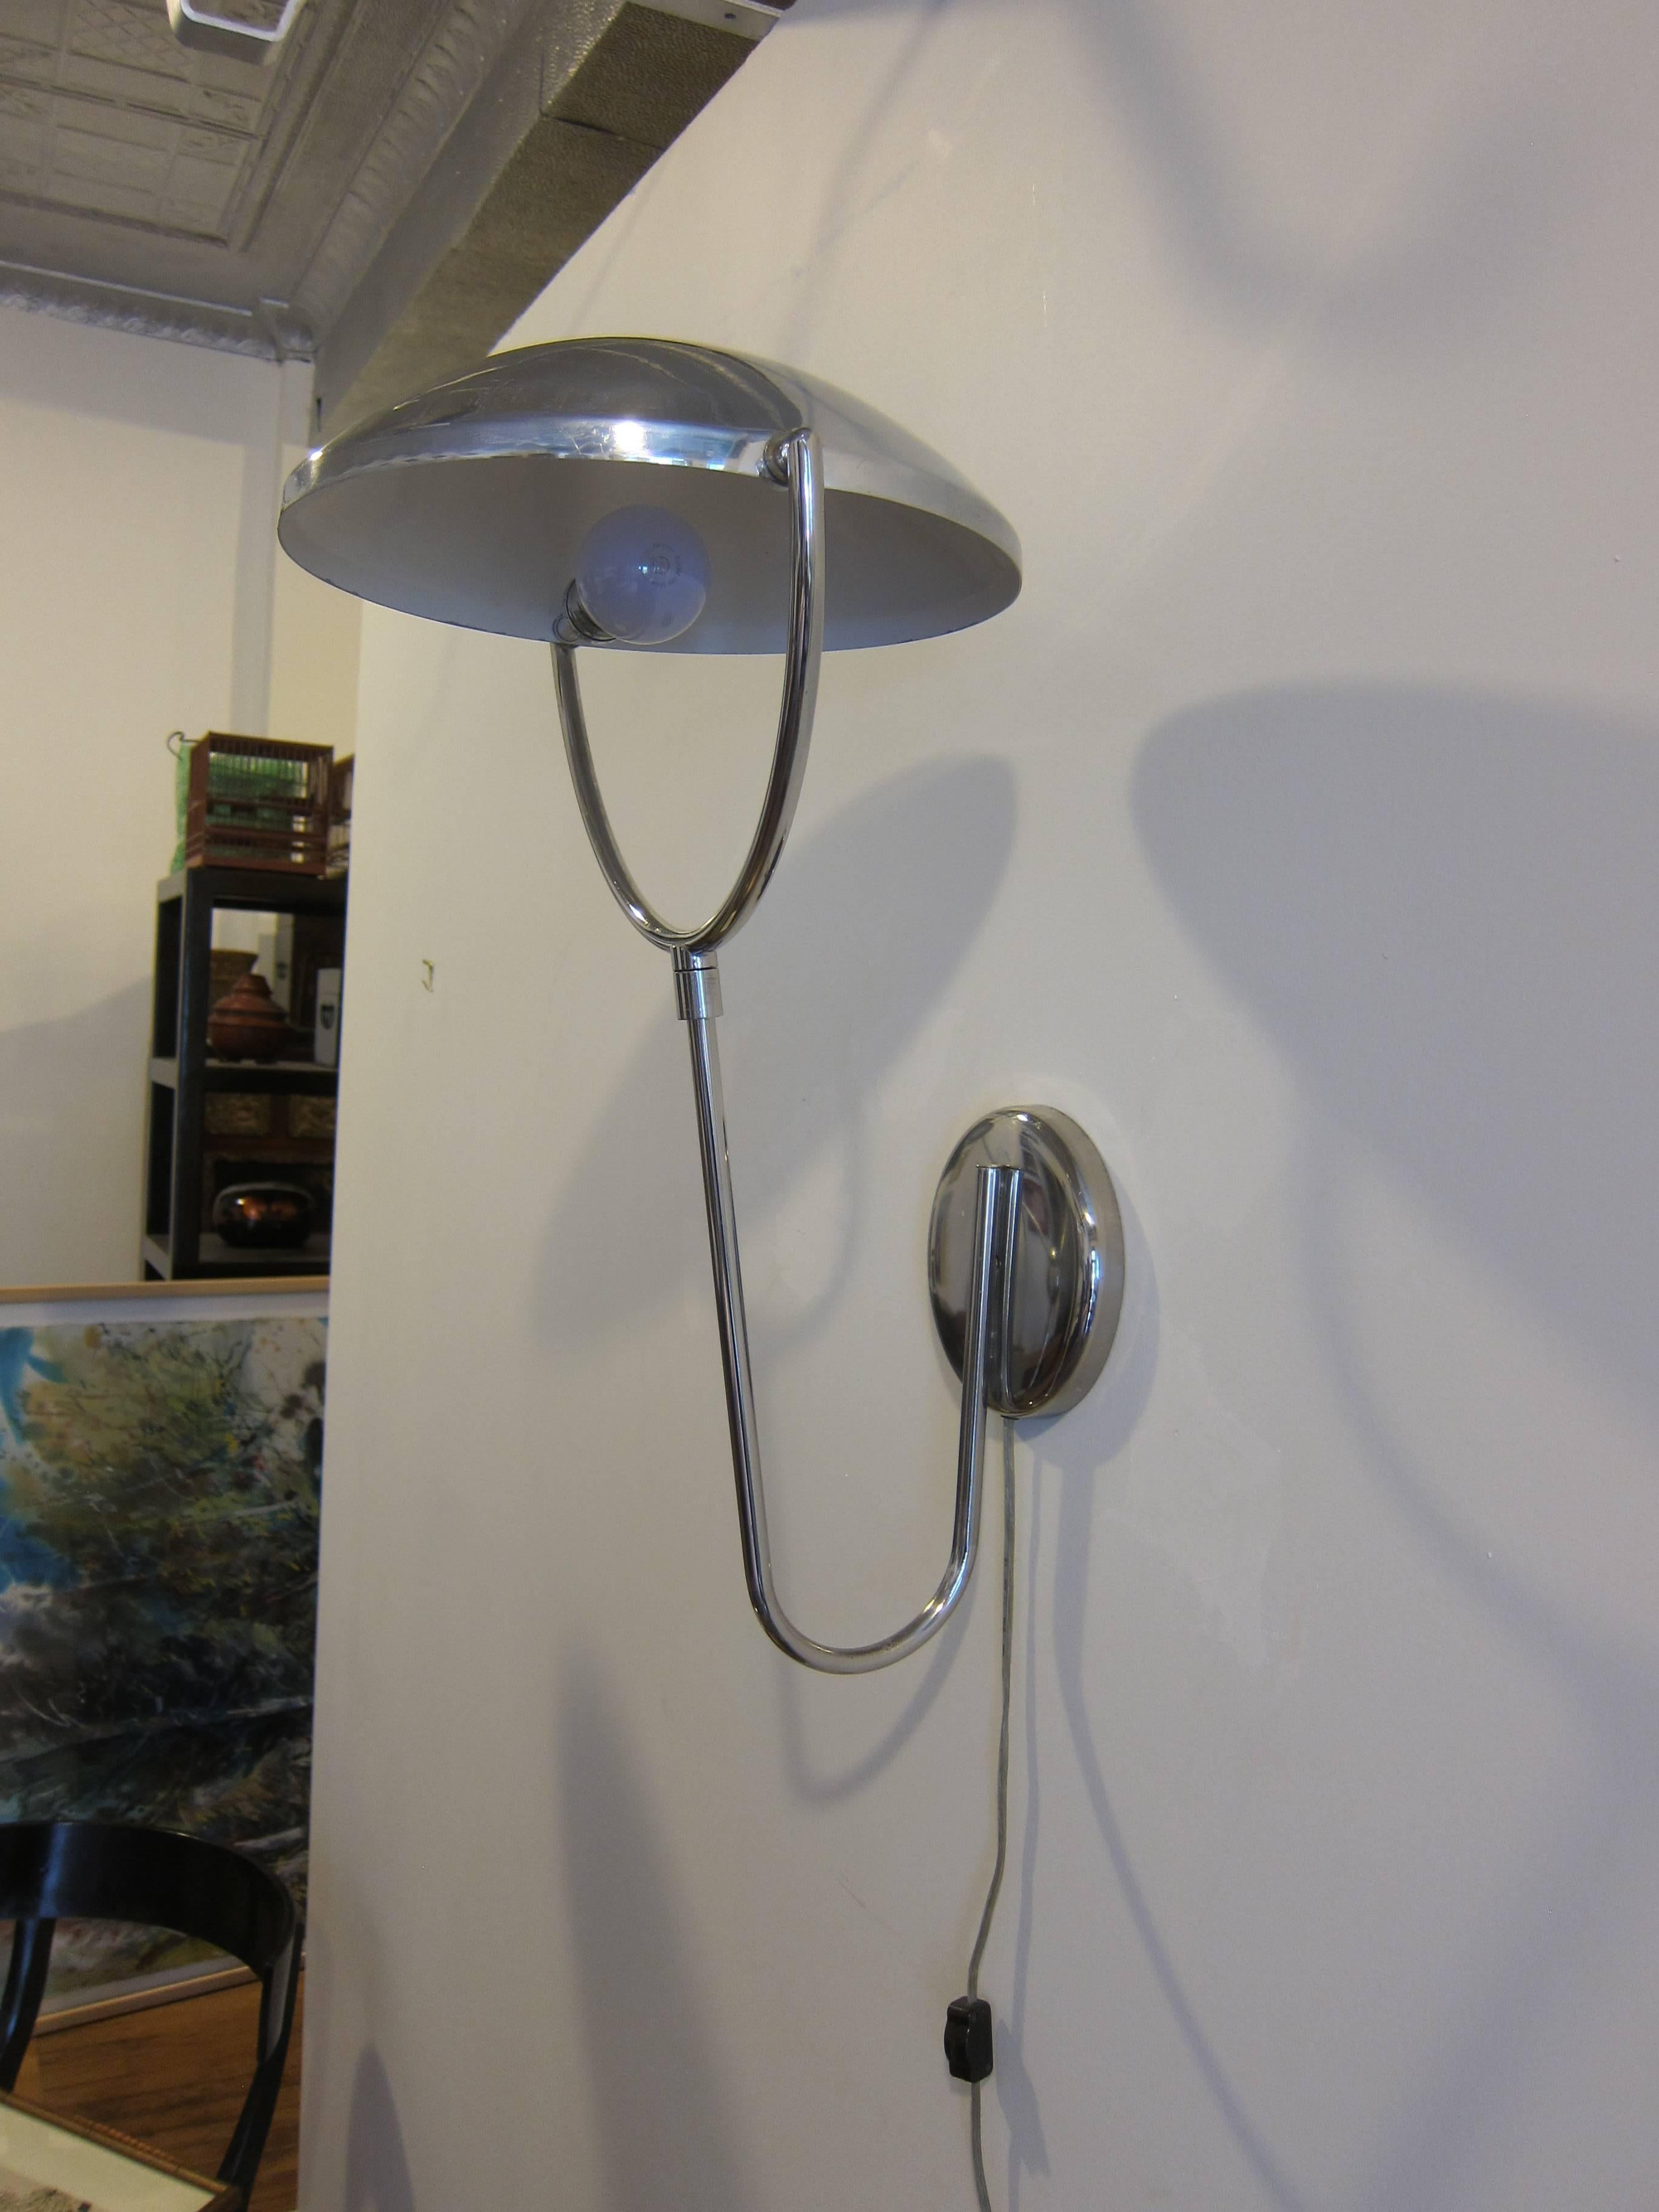 A rare Laurel articulating wall-mounted lamp sconce. The dome shade rotates, rotation allowing for various directions of light up or down. The arm that holds the shade rotates 300% from left to right allowing for the light to be directed to the